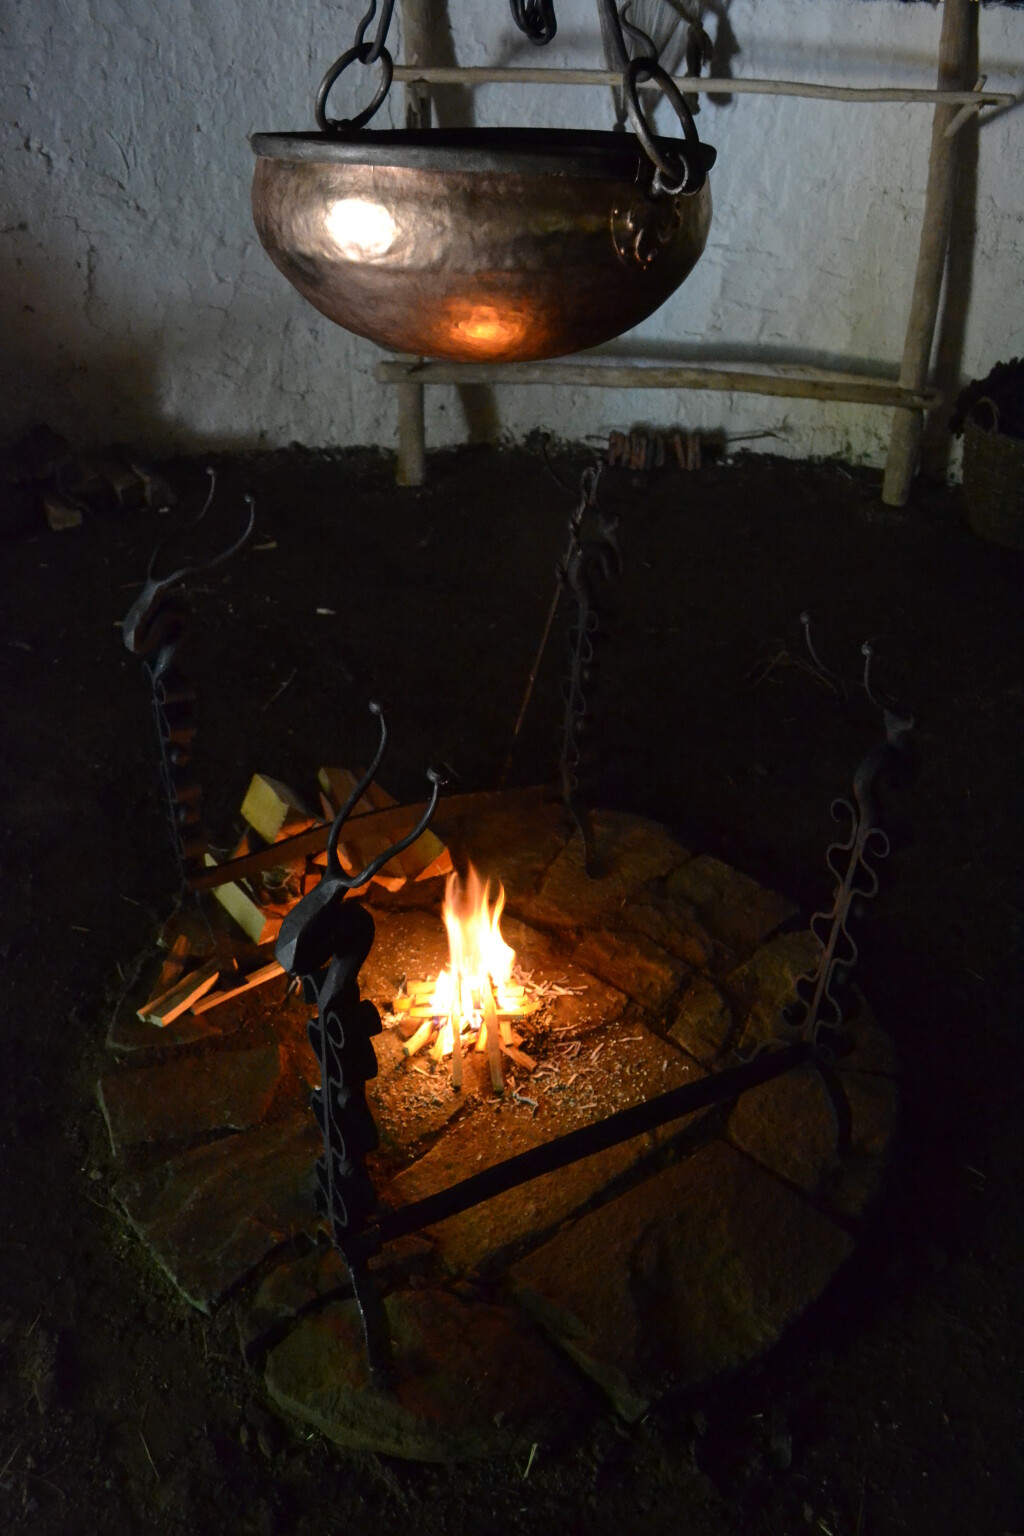 An image of the cauldron hanging above the fire